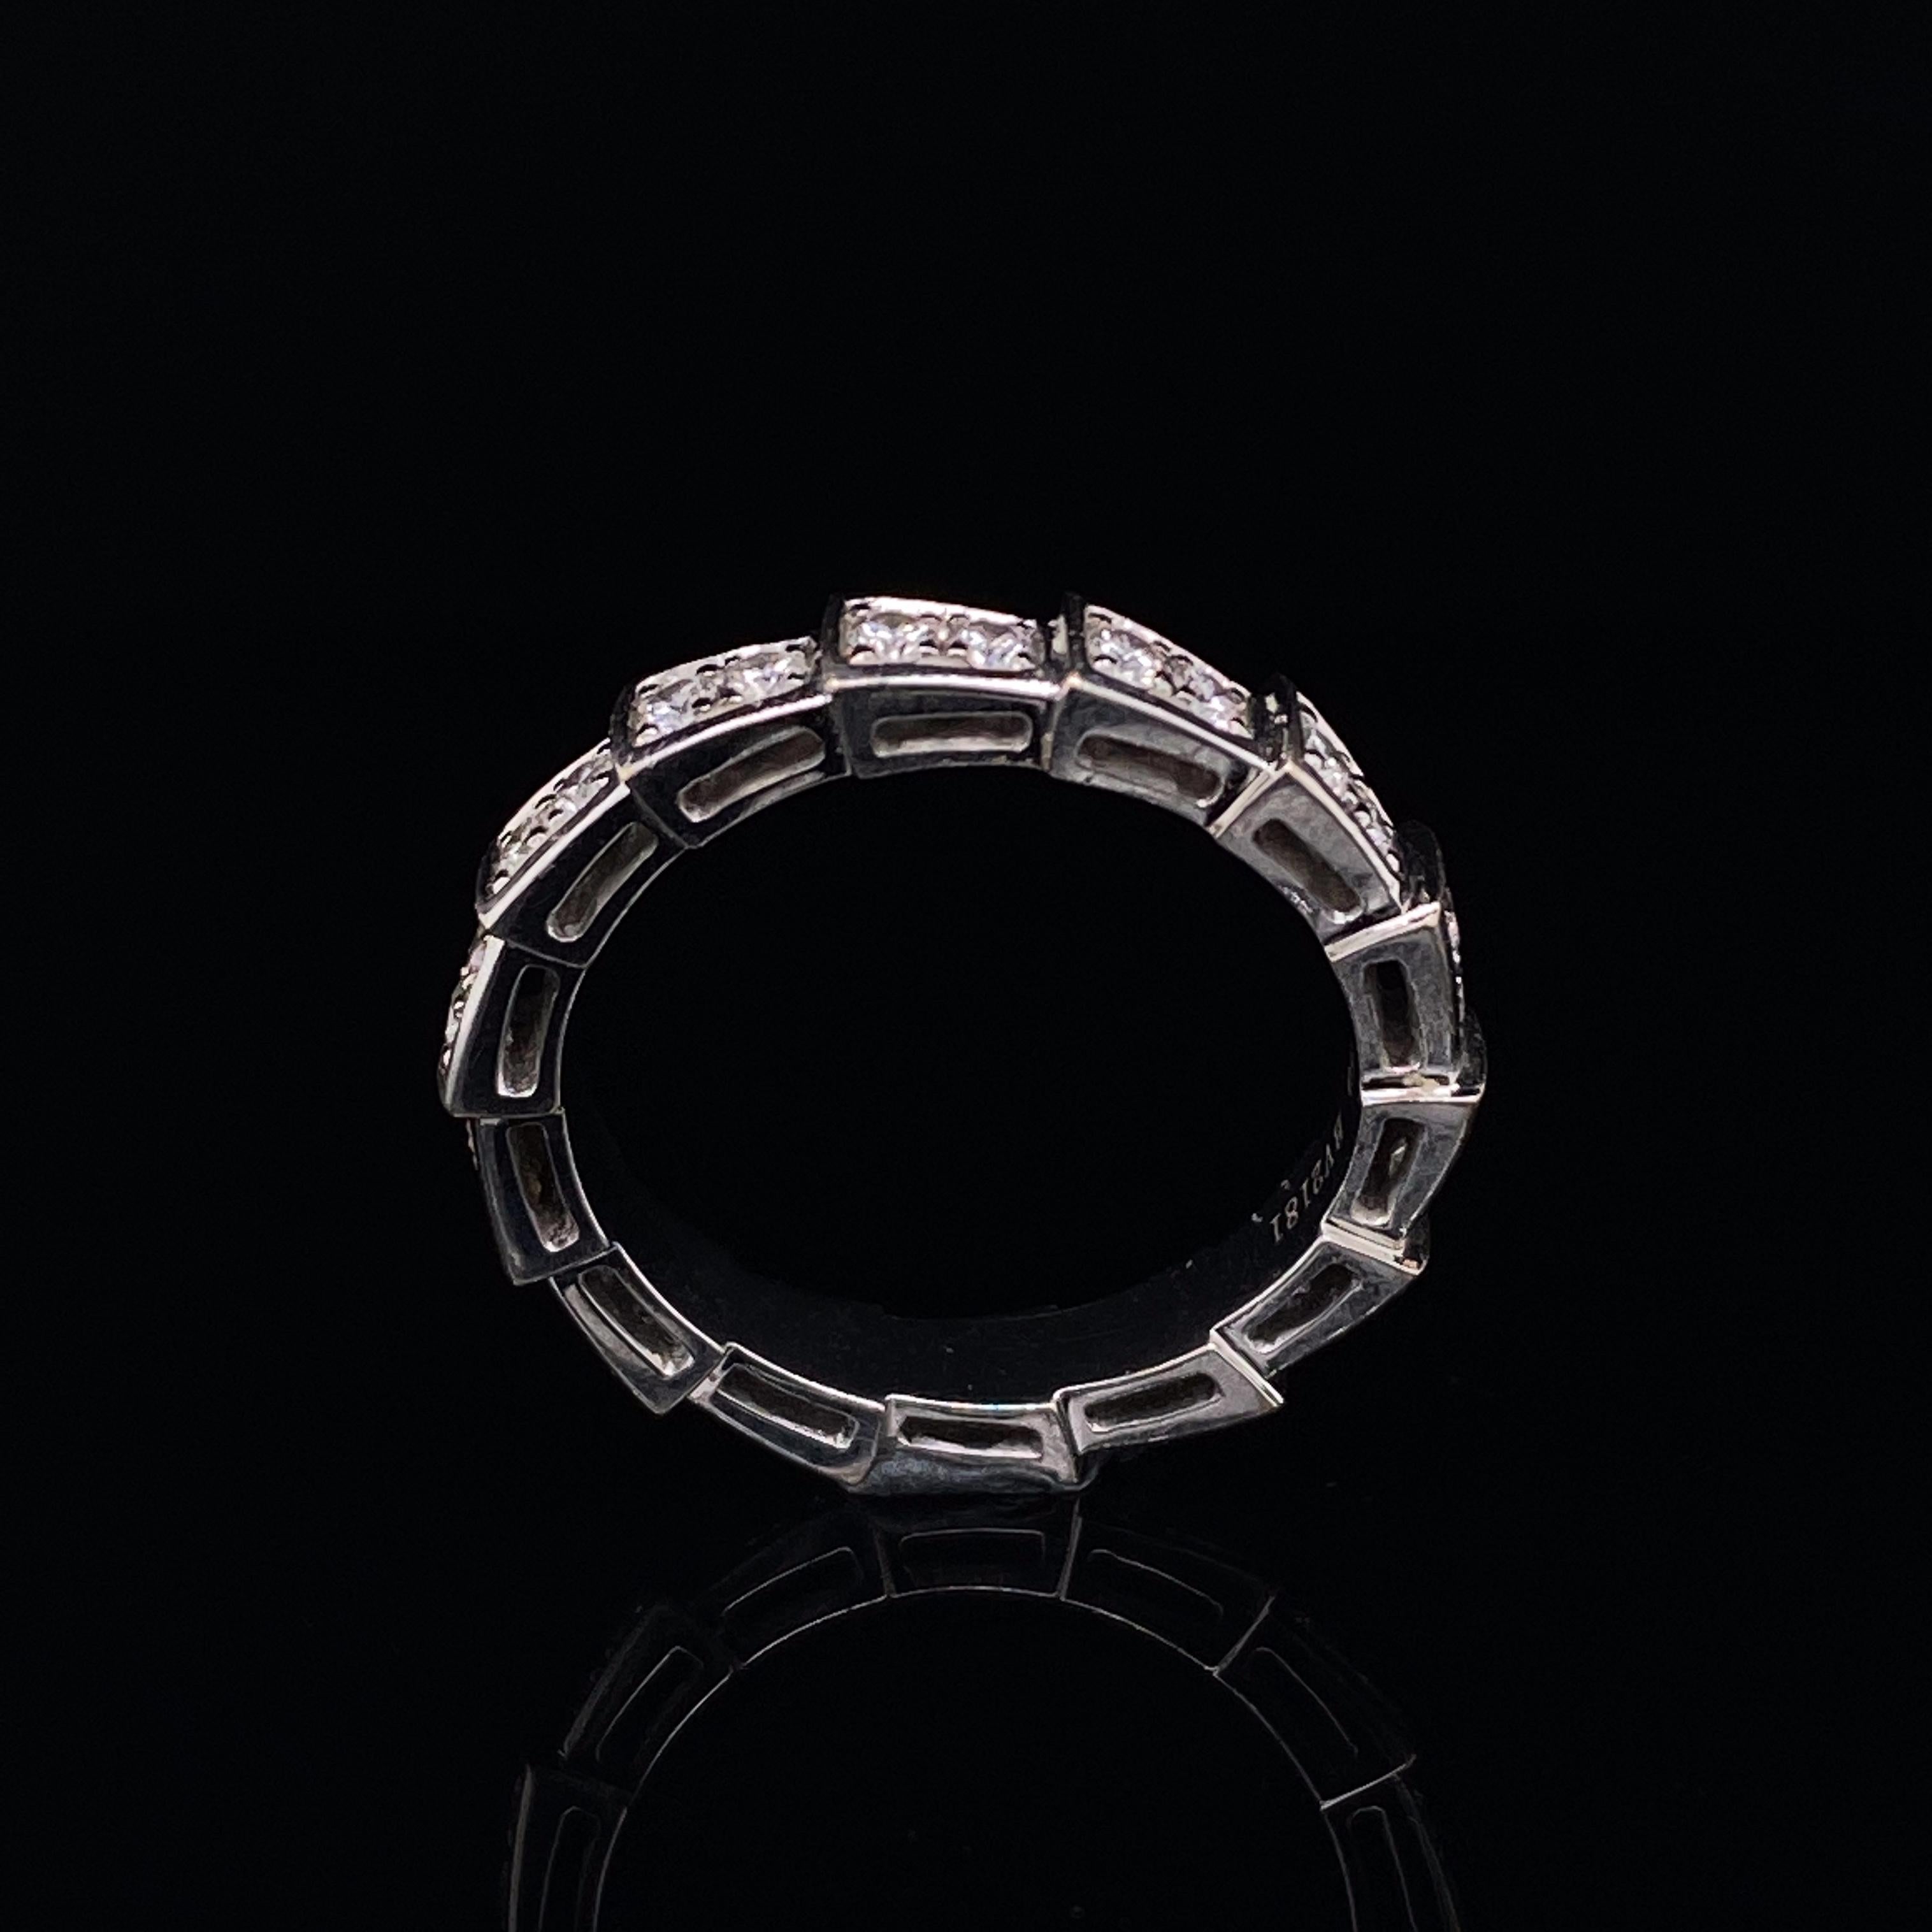 A Bvlgari Serpenti Viper diamond ring in 18 karat white gold.

This statement ring is pave set with round brilliant cut diamonds which coil around the finger mirroring both the scales and sinuosity of a snake. 
Comprised of fourteen individual